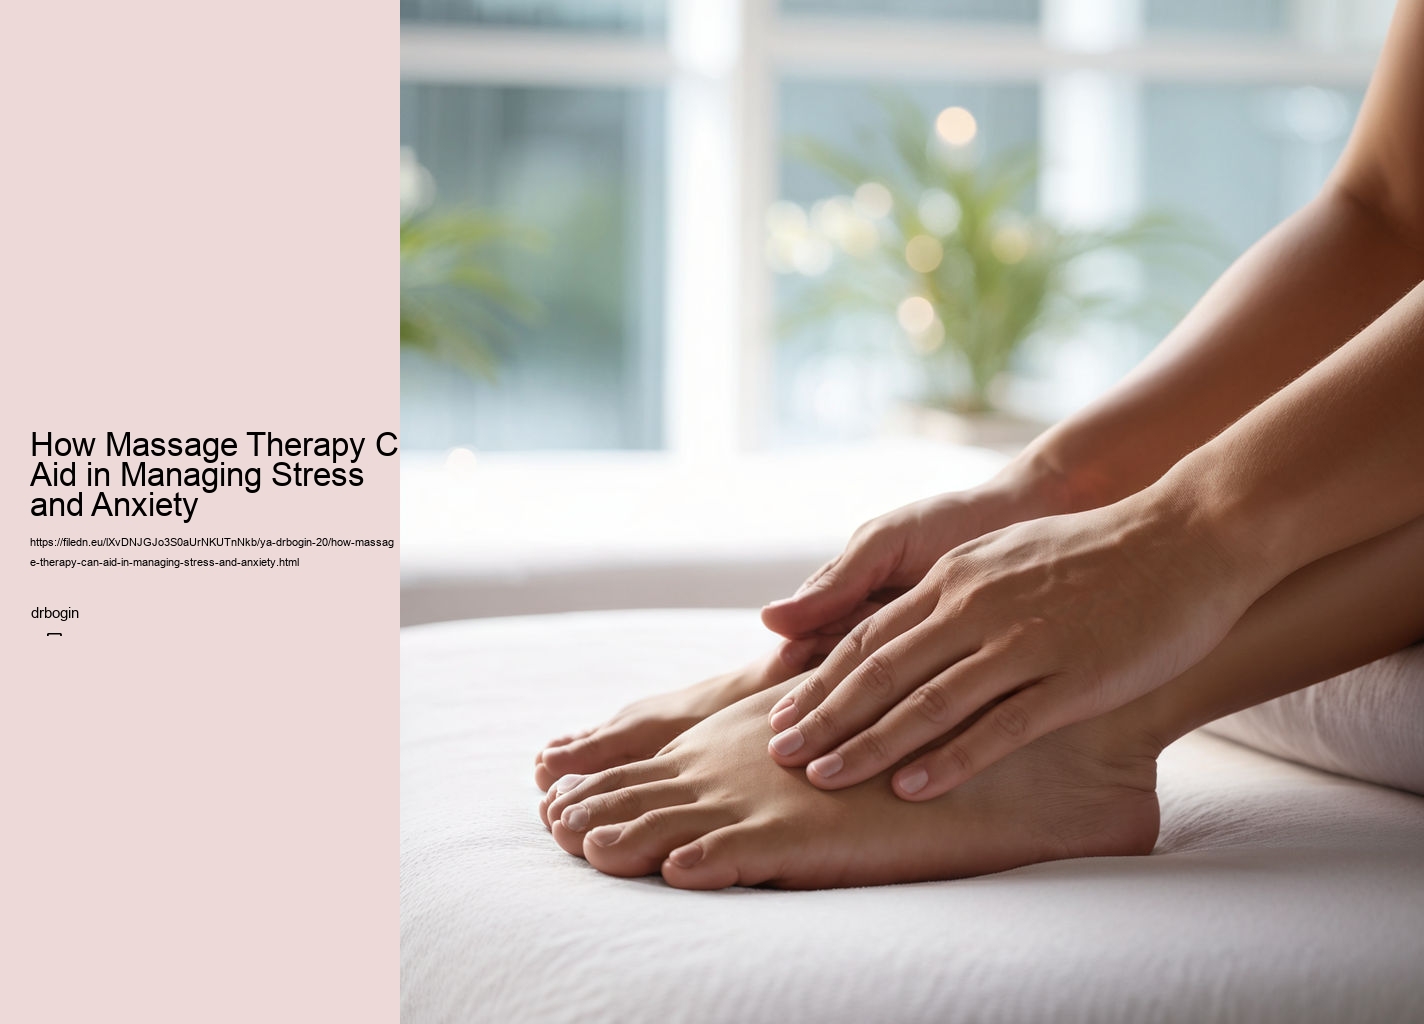 How Massage Therapy Can Aid in Managing Stress and Anxiety